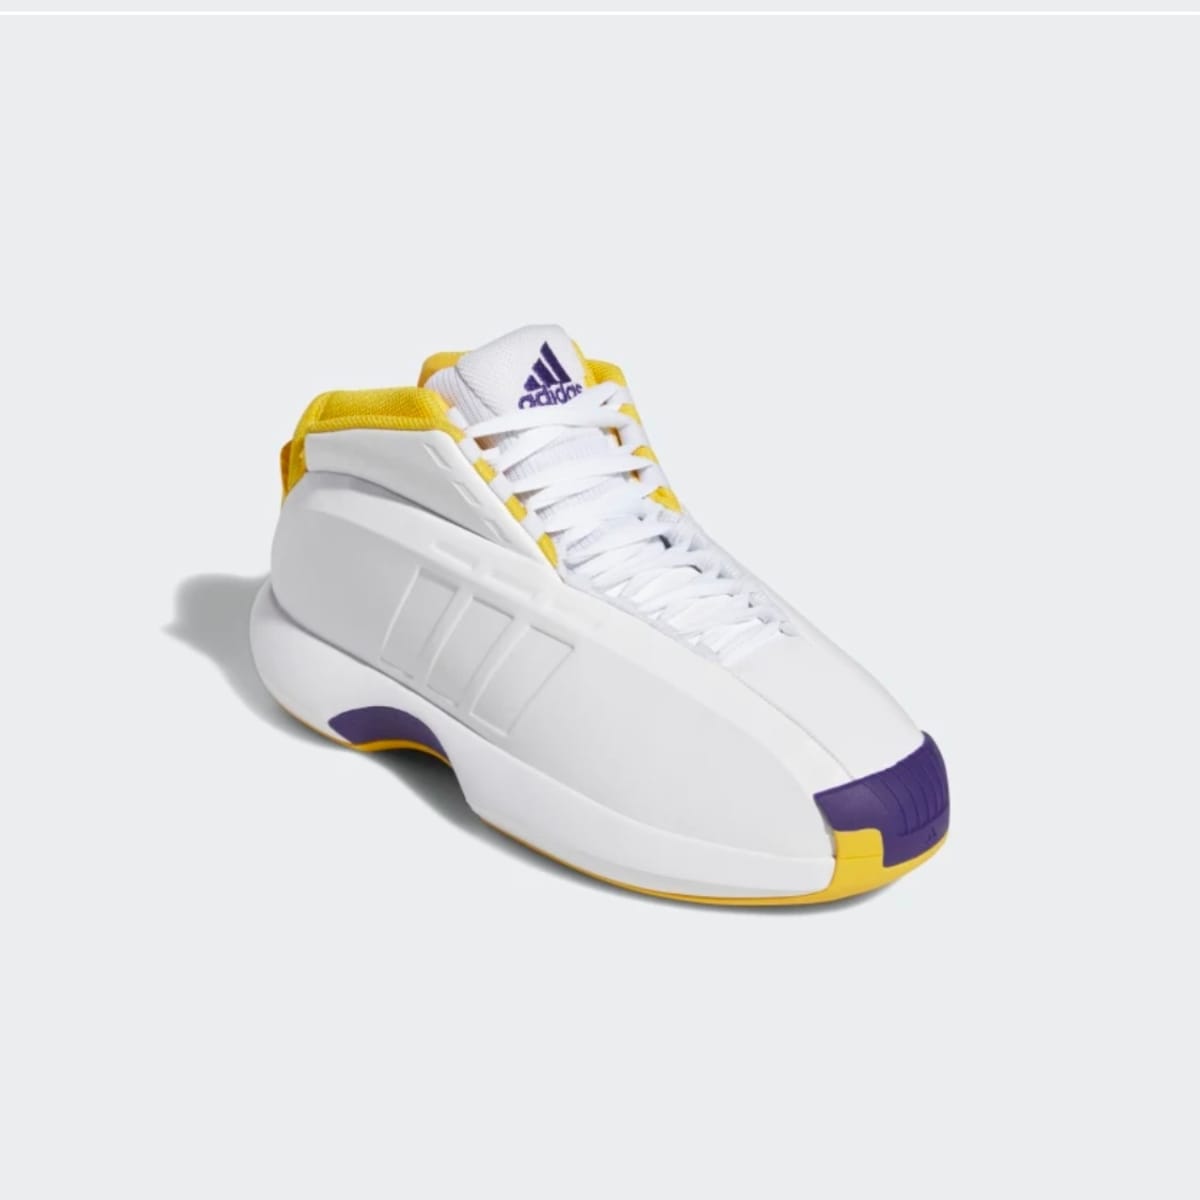 Adidas Crazy 1 'Lakers' Release Information - Sports Illustrated